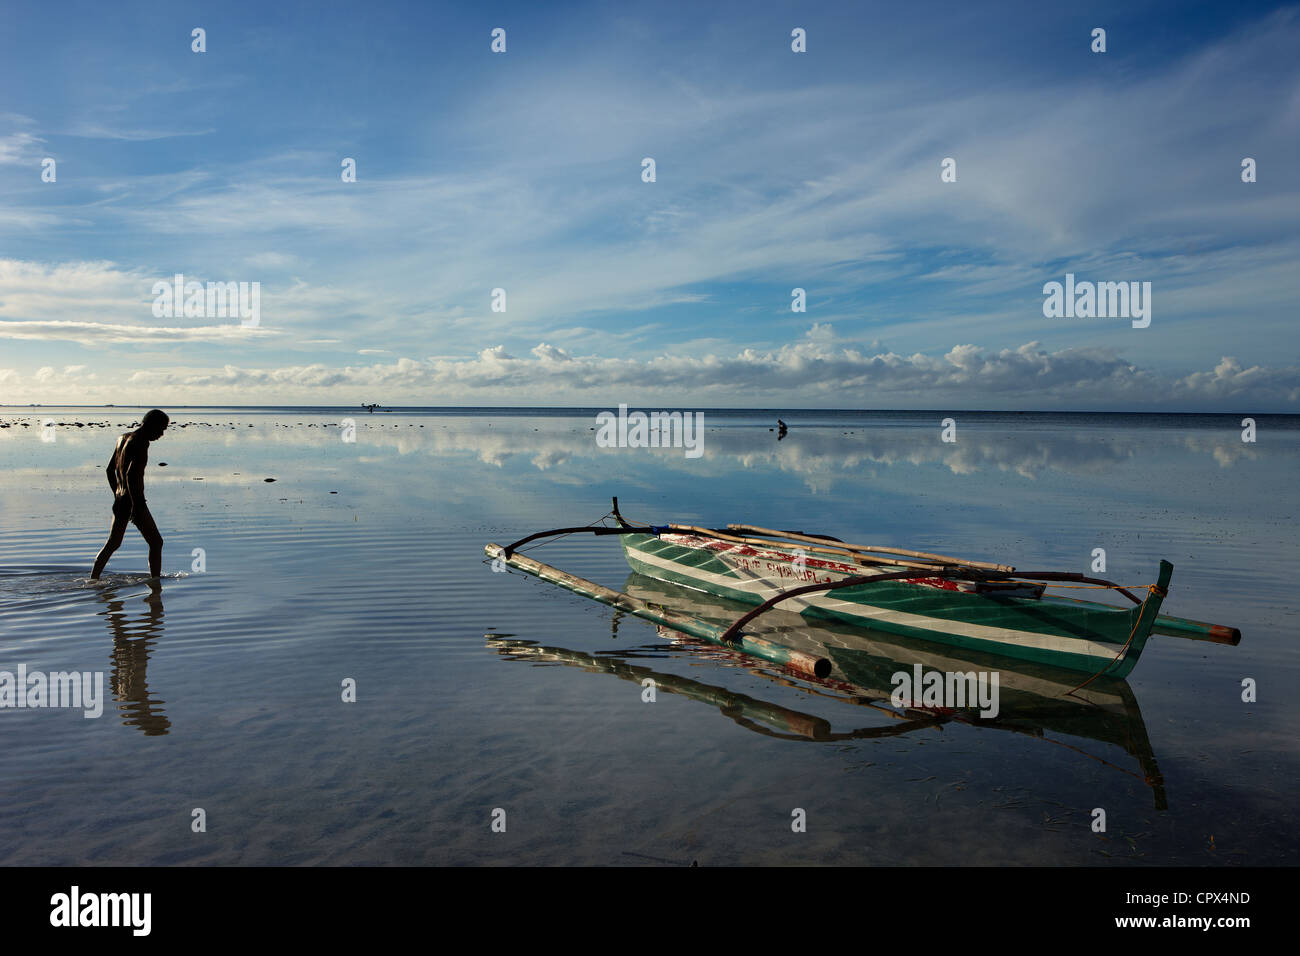 a man collecting shells during low tide, Siquijor, The Visayas, Philippines Stock Photo